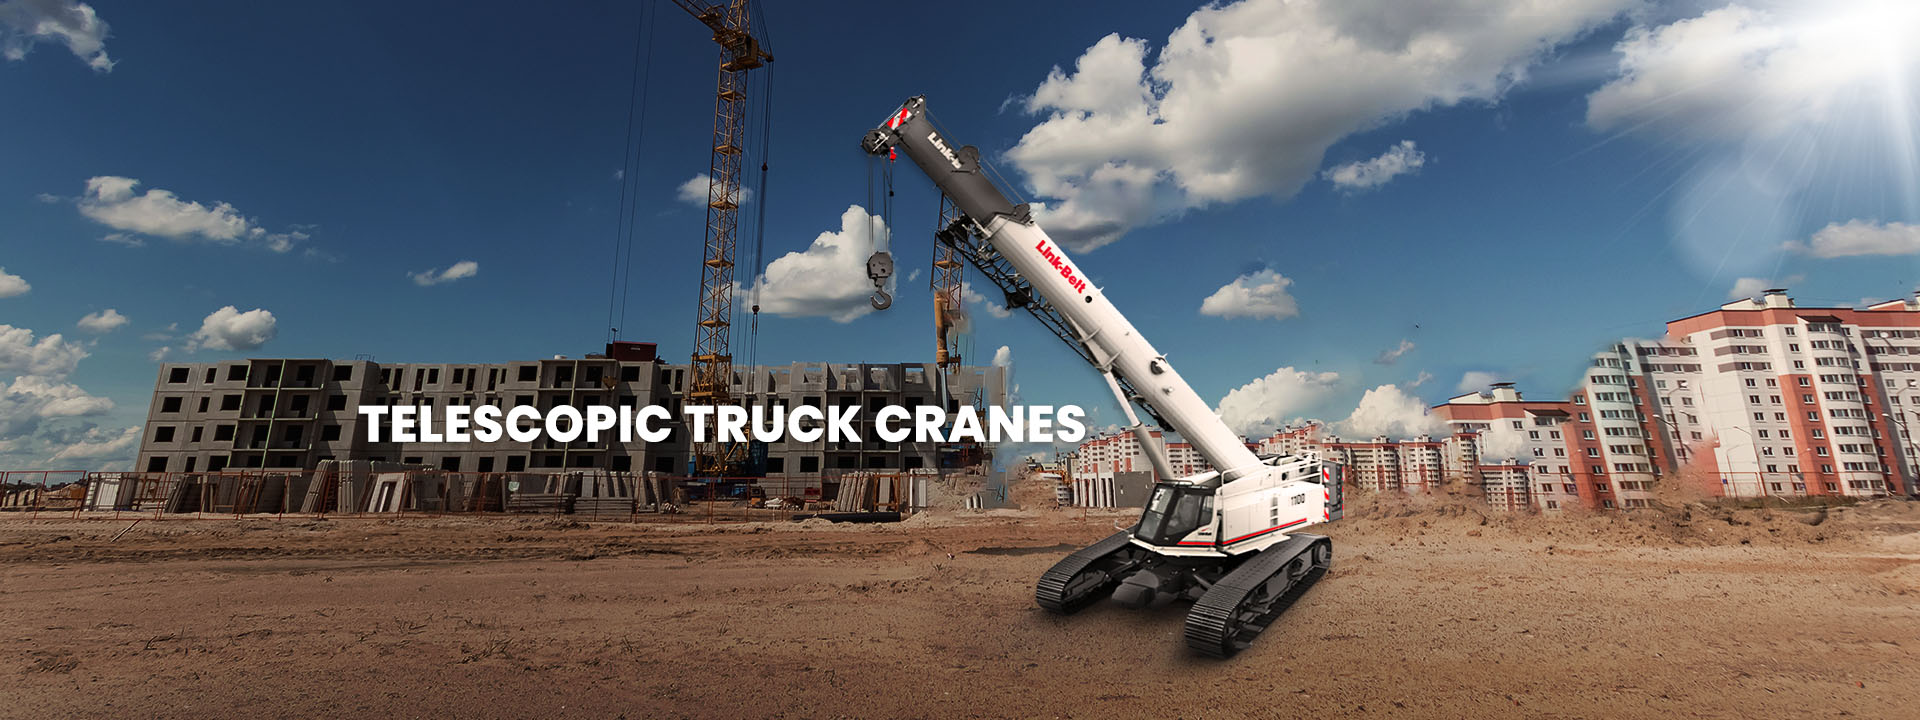 4 4 main types of mobile cranes commonly used in construction